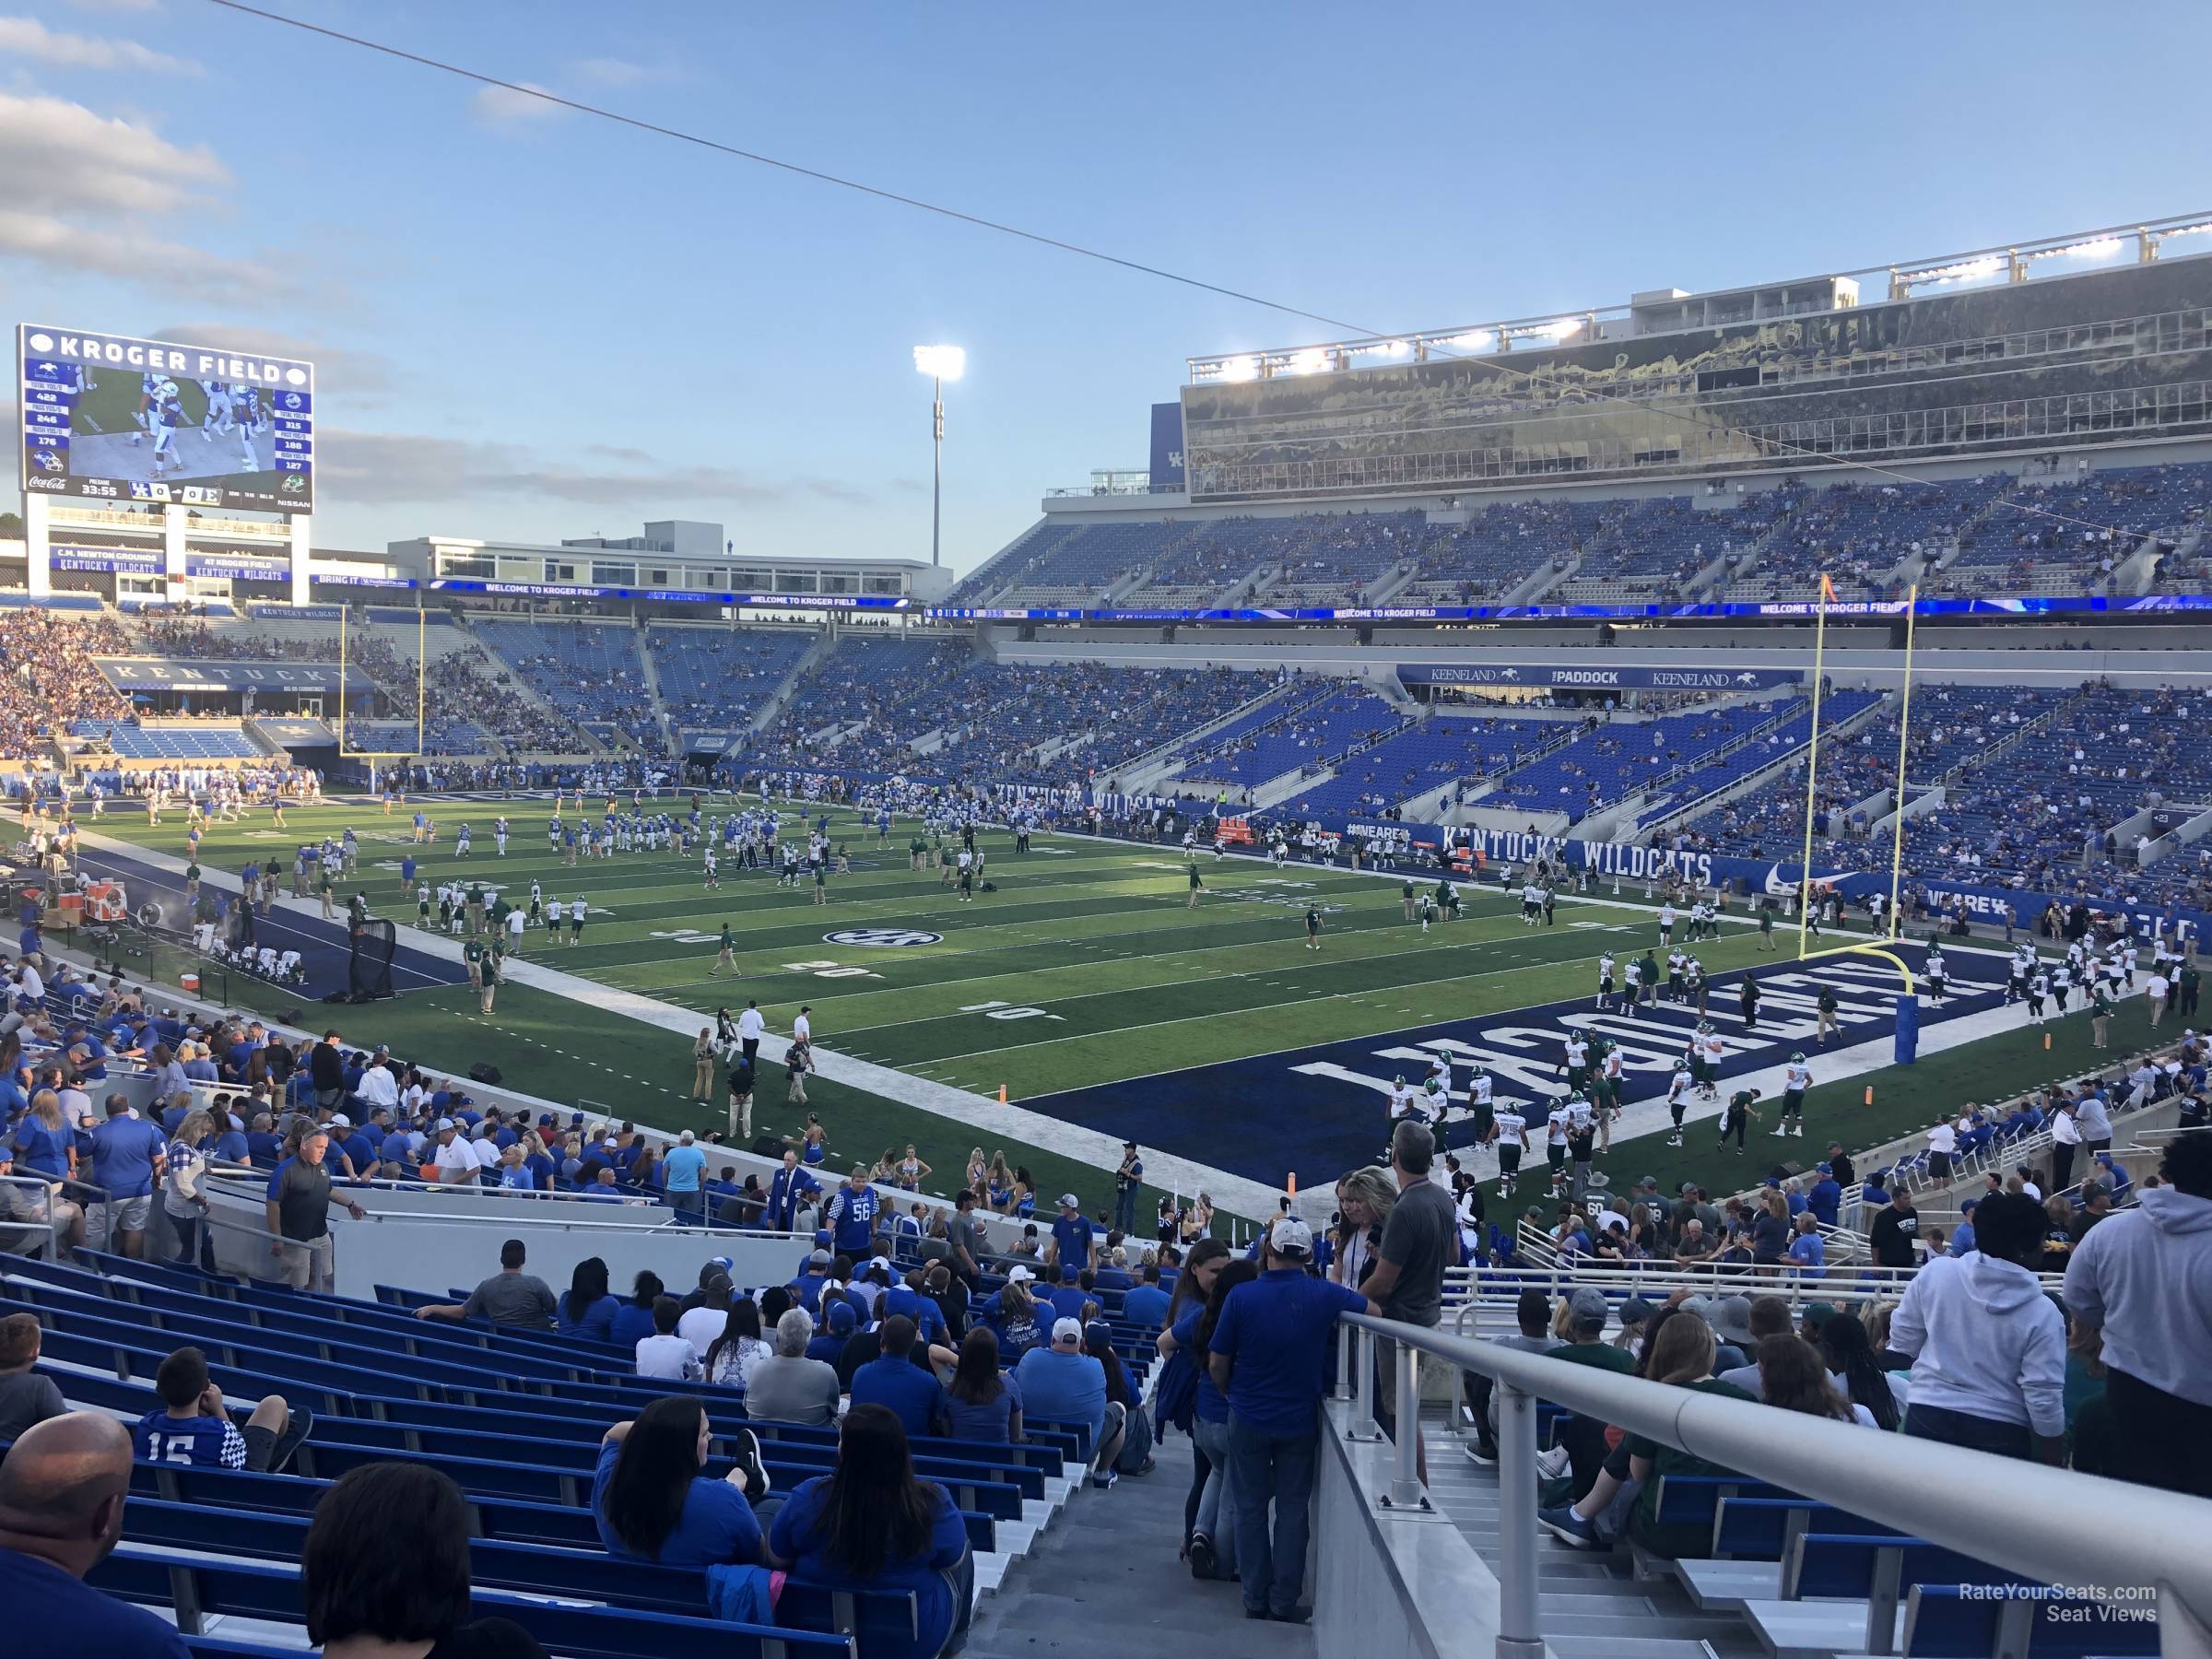 Section 11 at Kroger Field